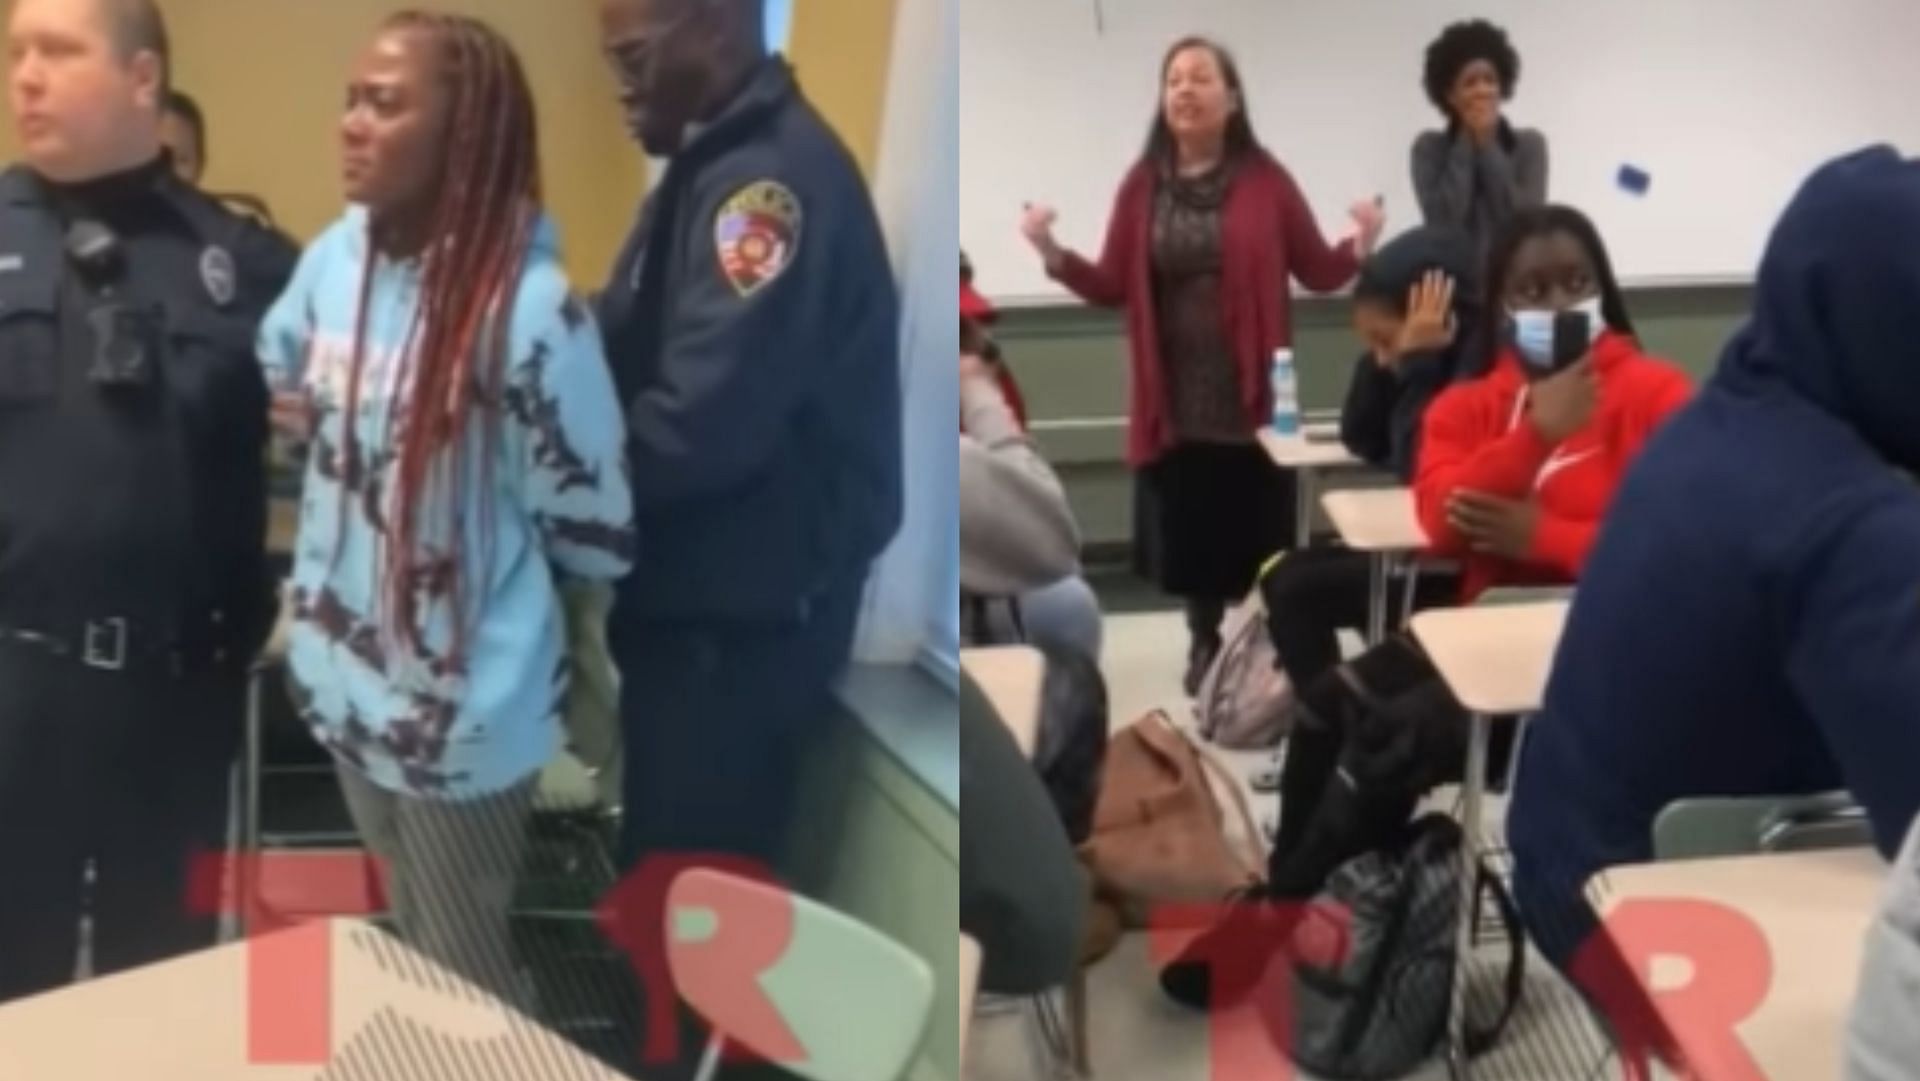 University Why was Leilla Hamud arrested? Video of Winston Salem State